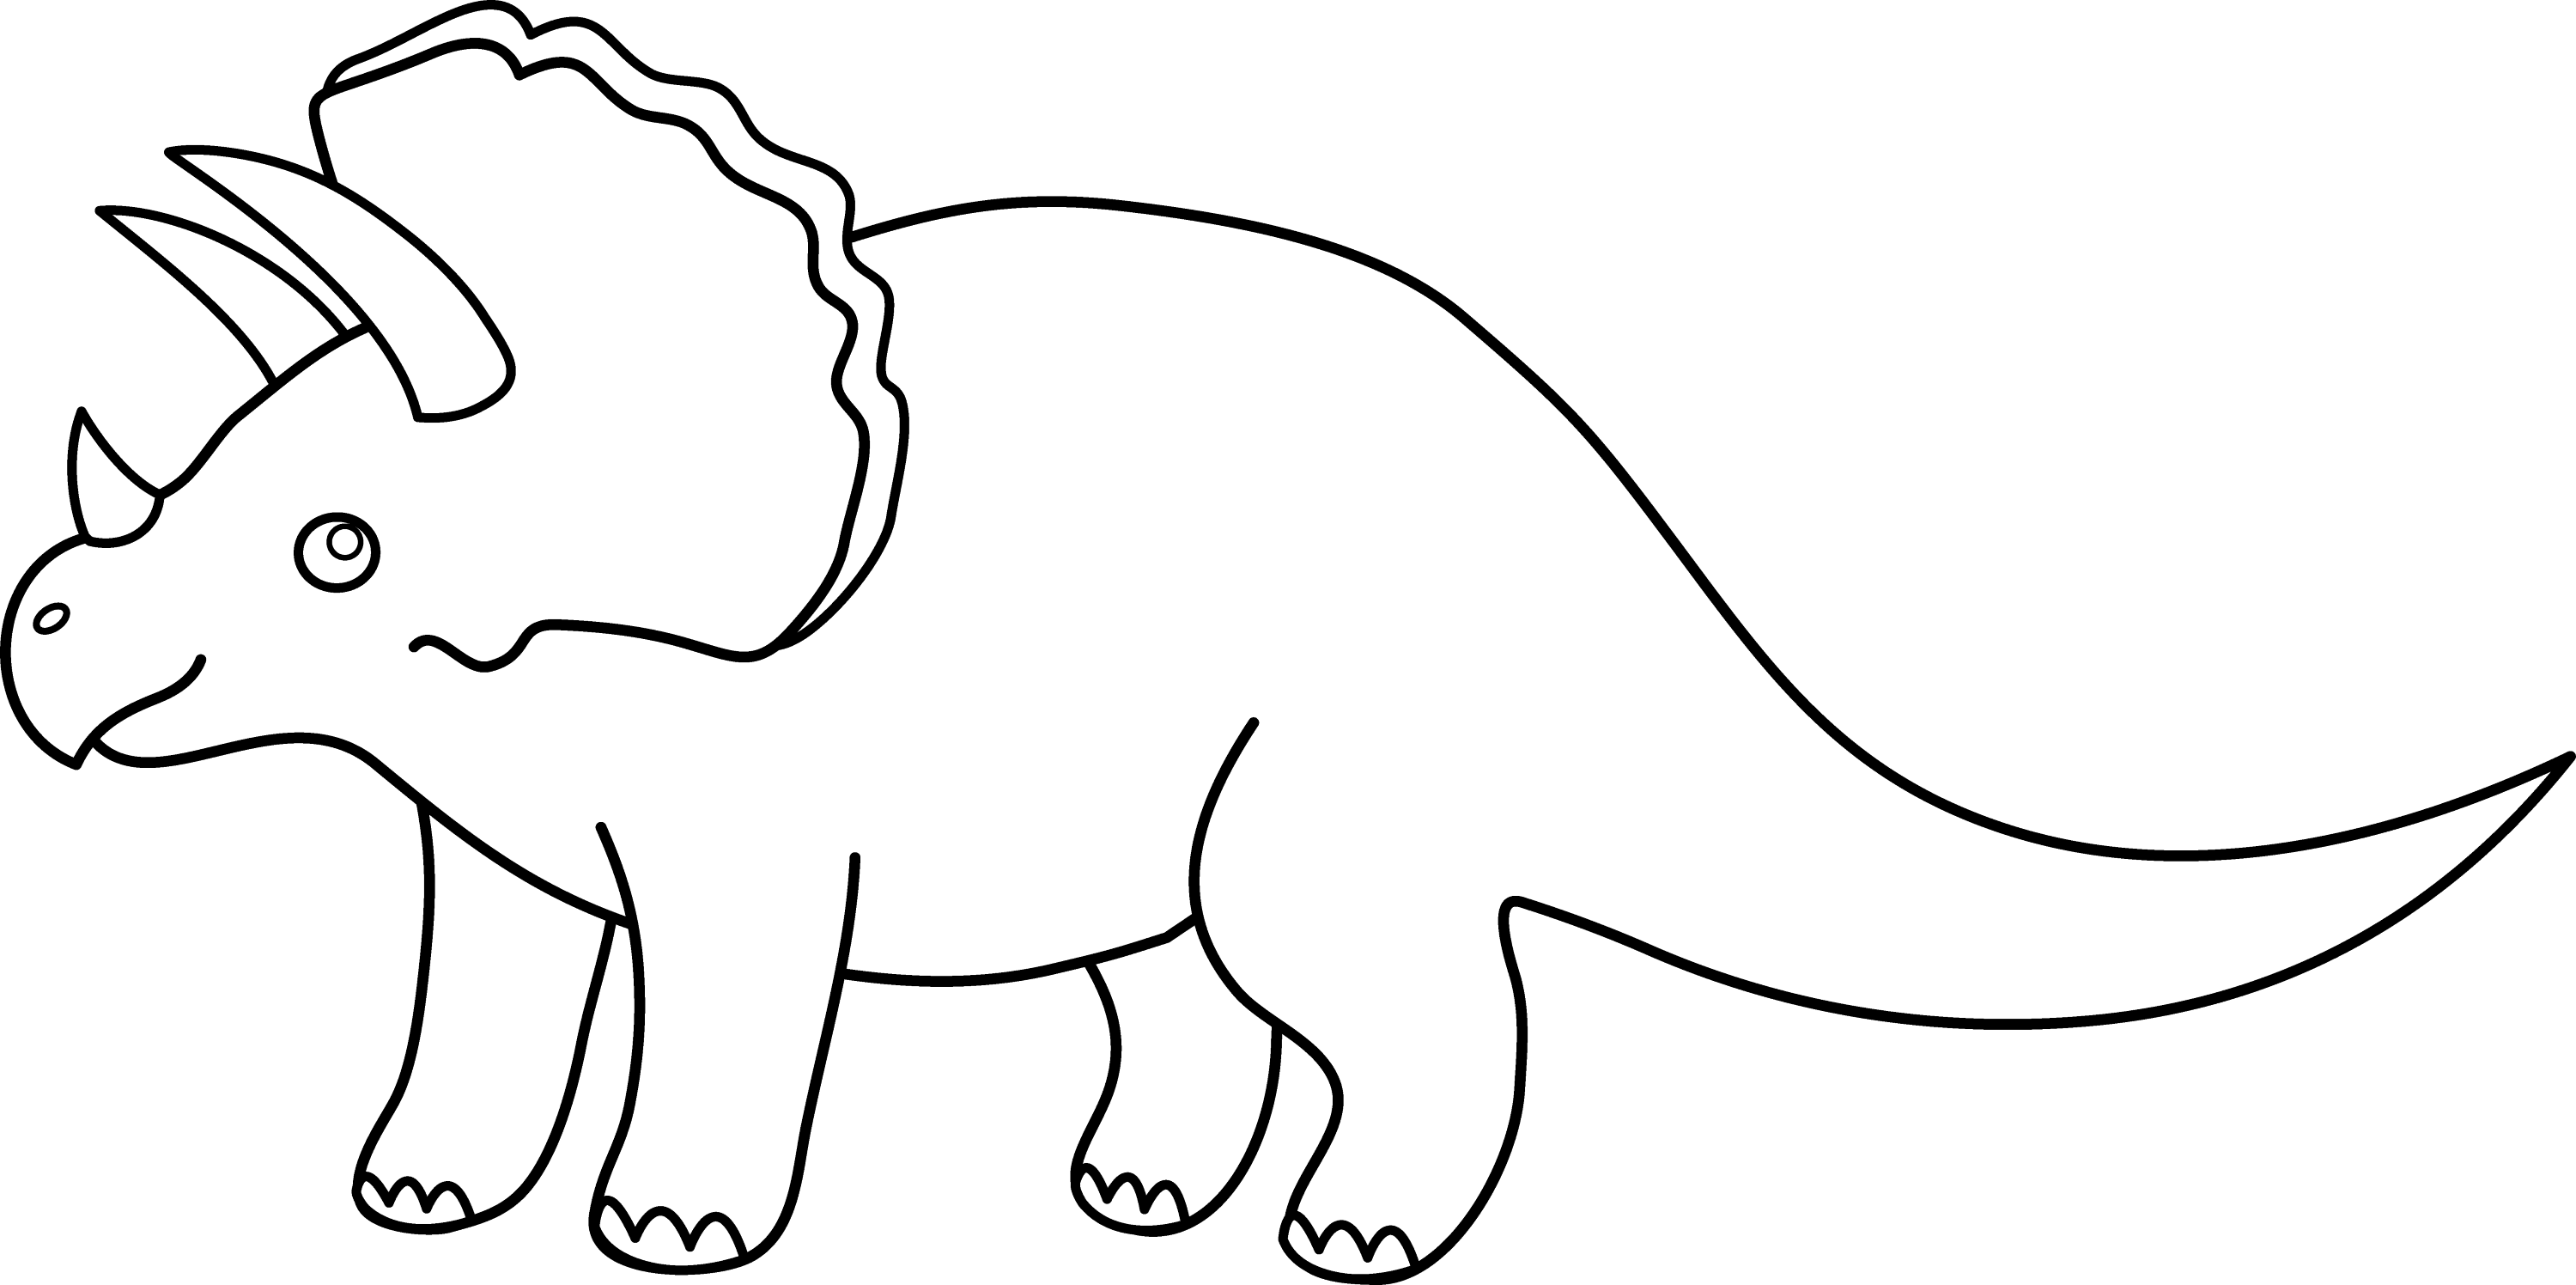 free black and white clipart of dinosaurs - photo #1